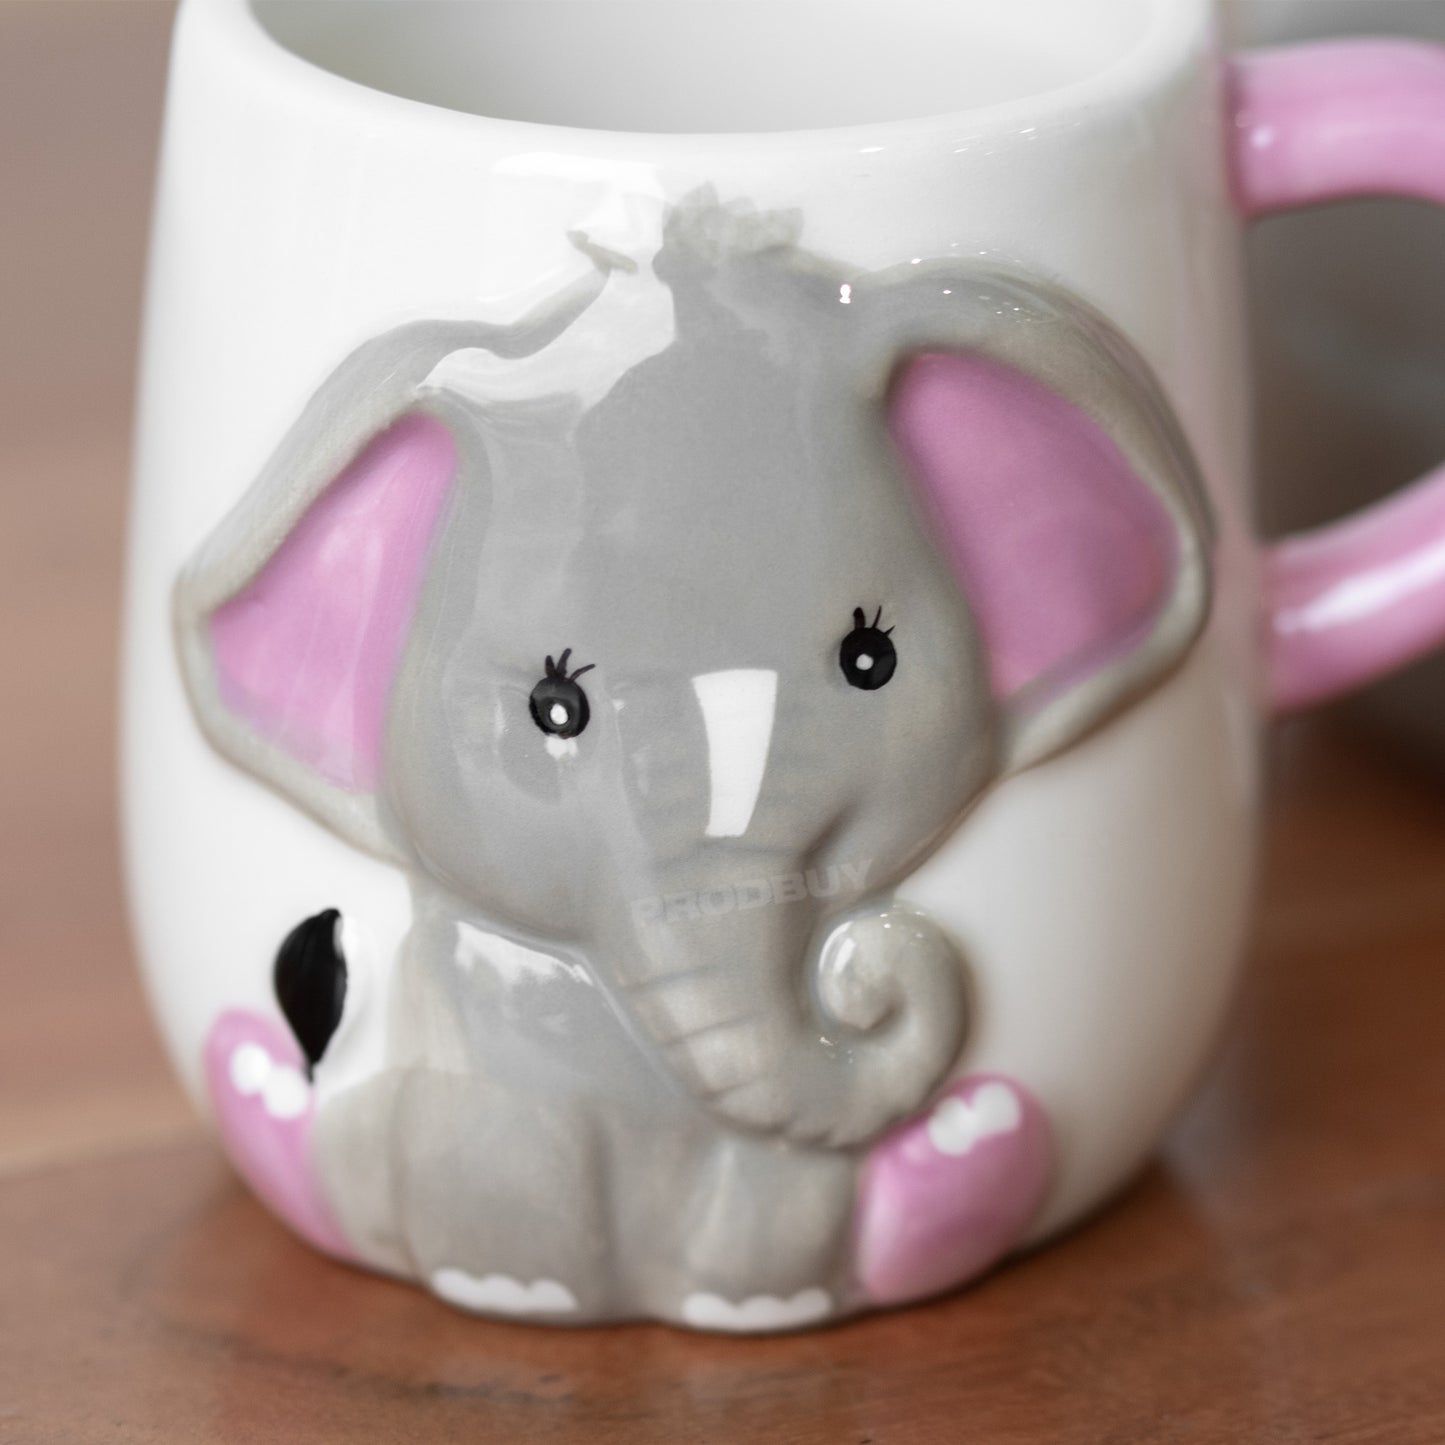 Set of 2 Elephant Mugs Small & Large Gift Cups